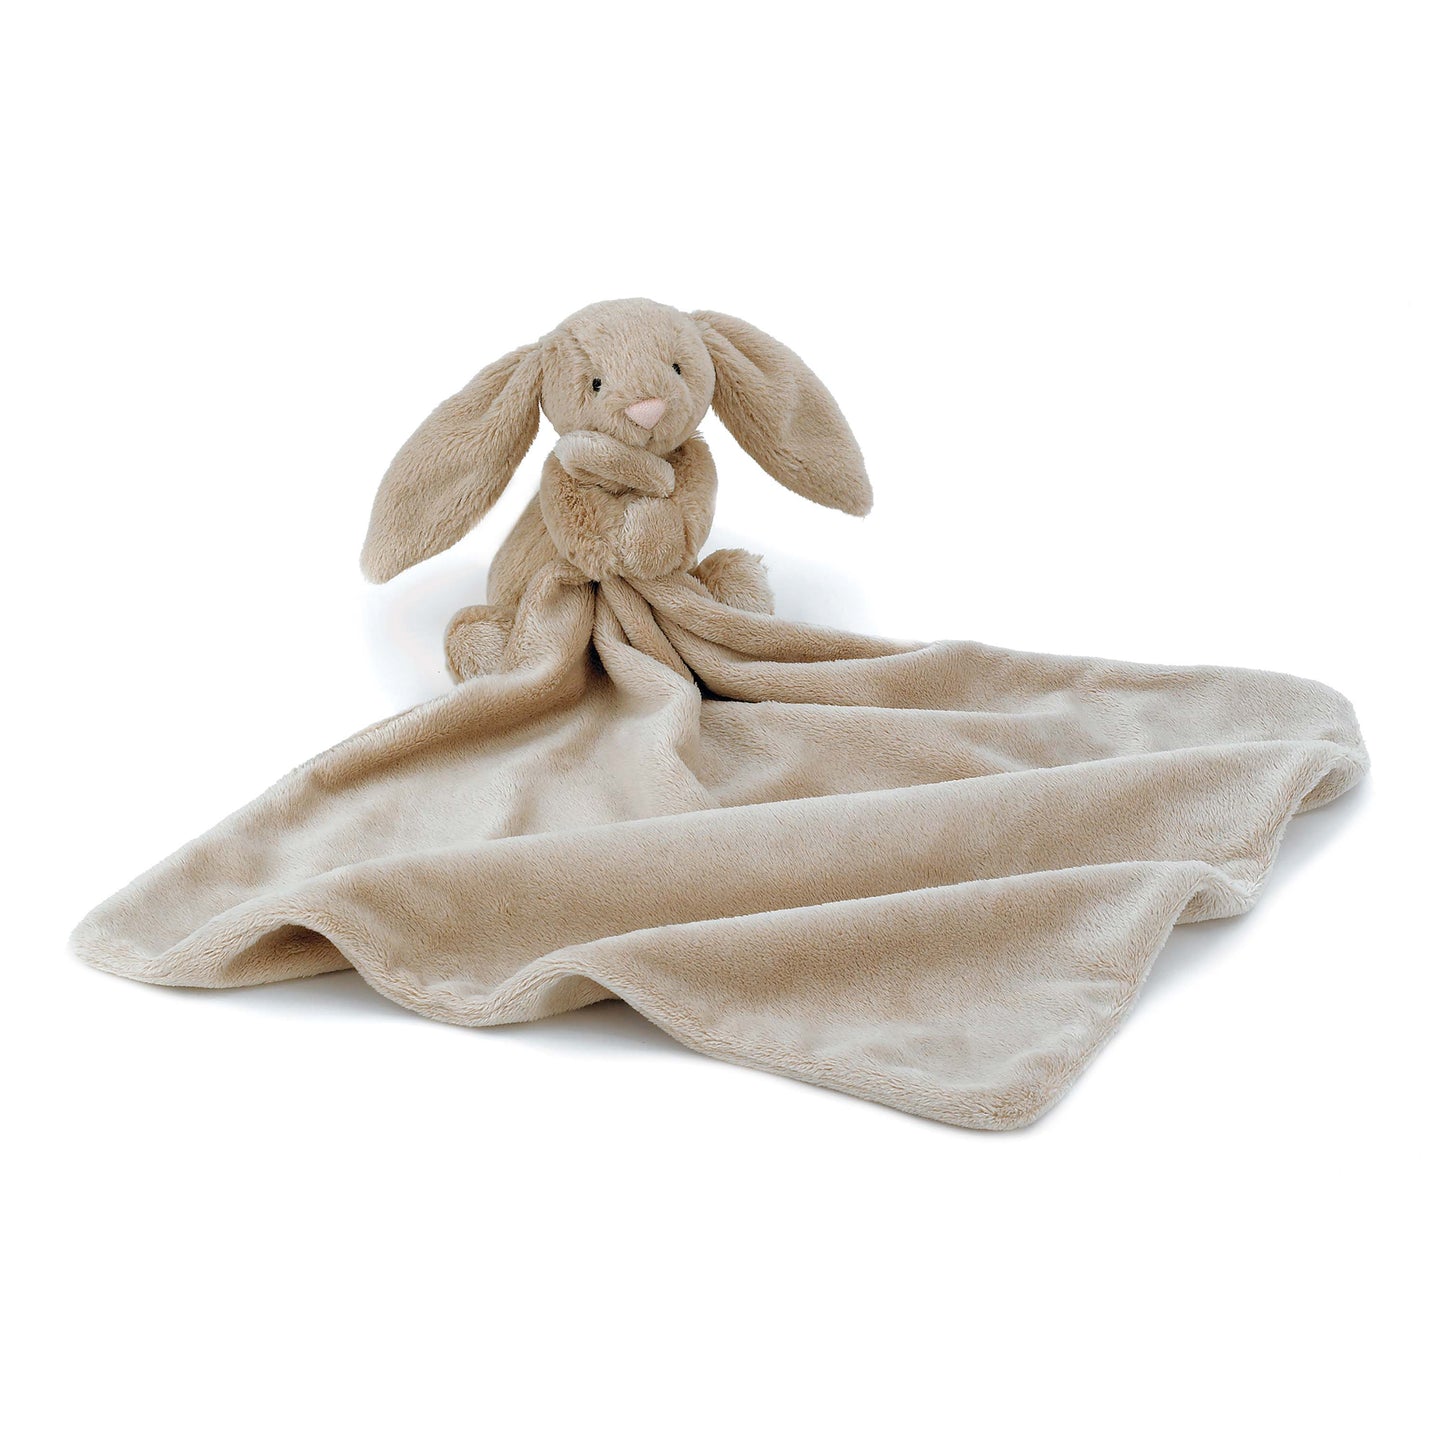 Bashful Beige Bunny Soother | Jellycat